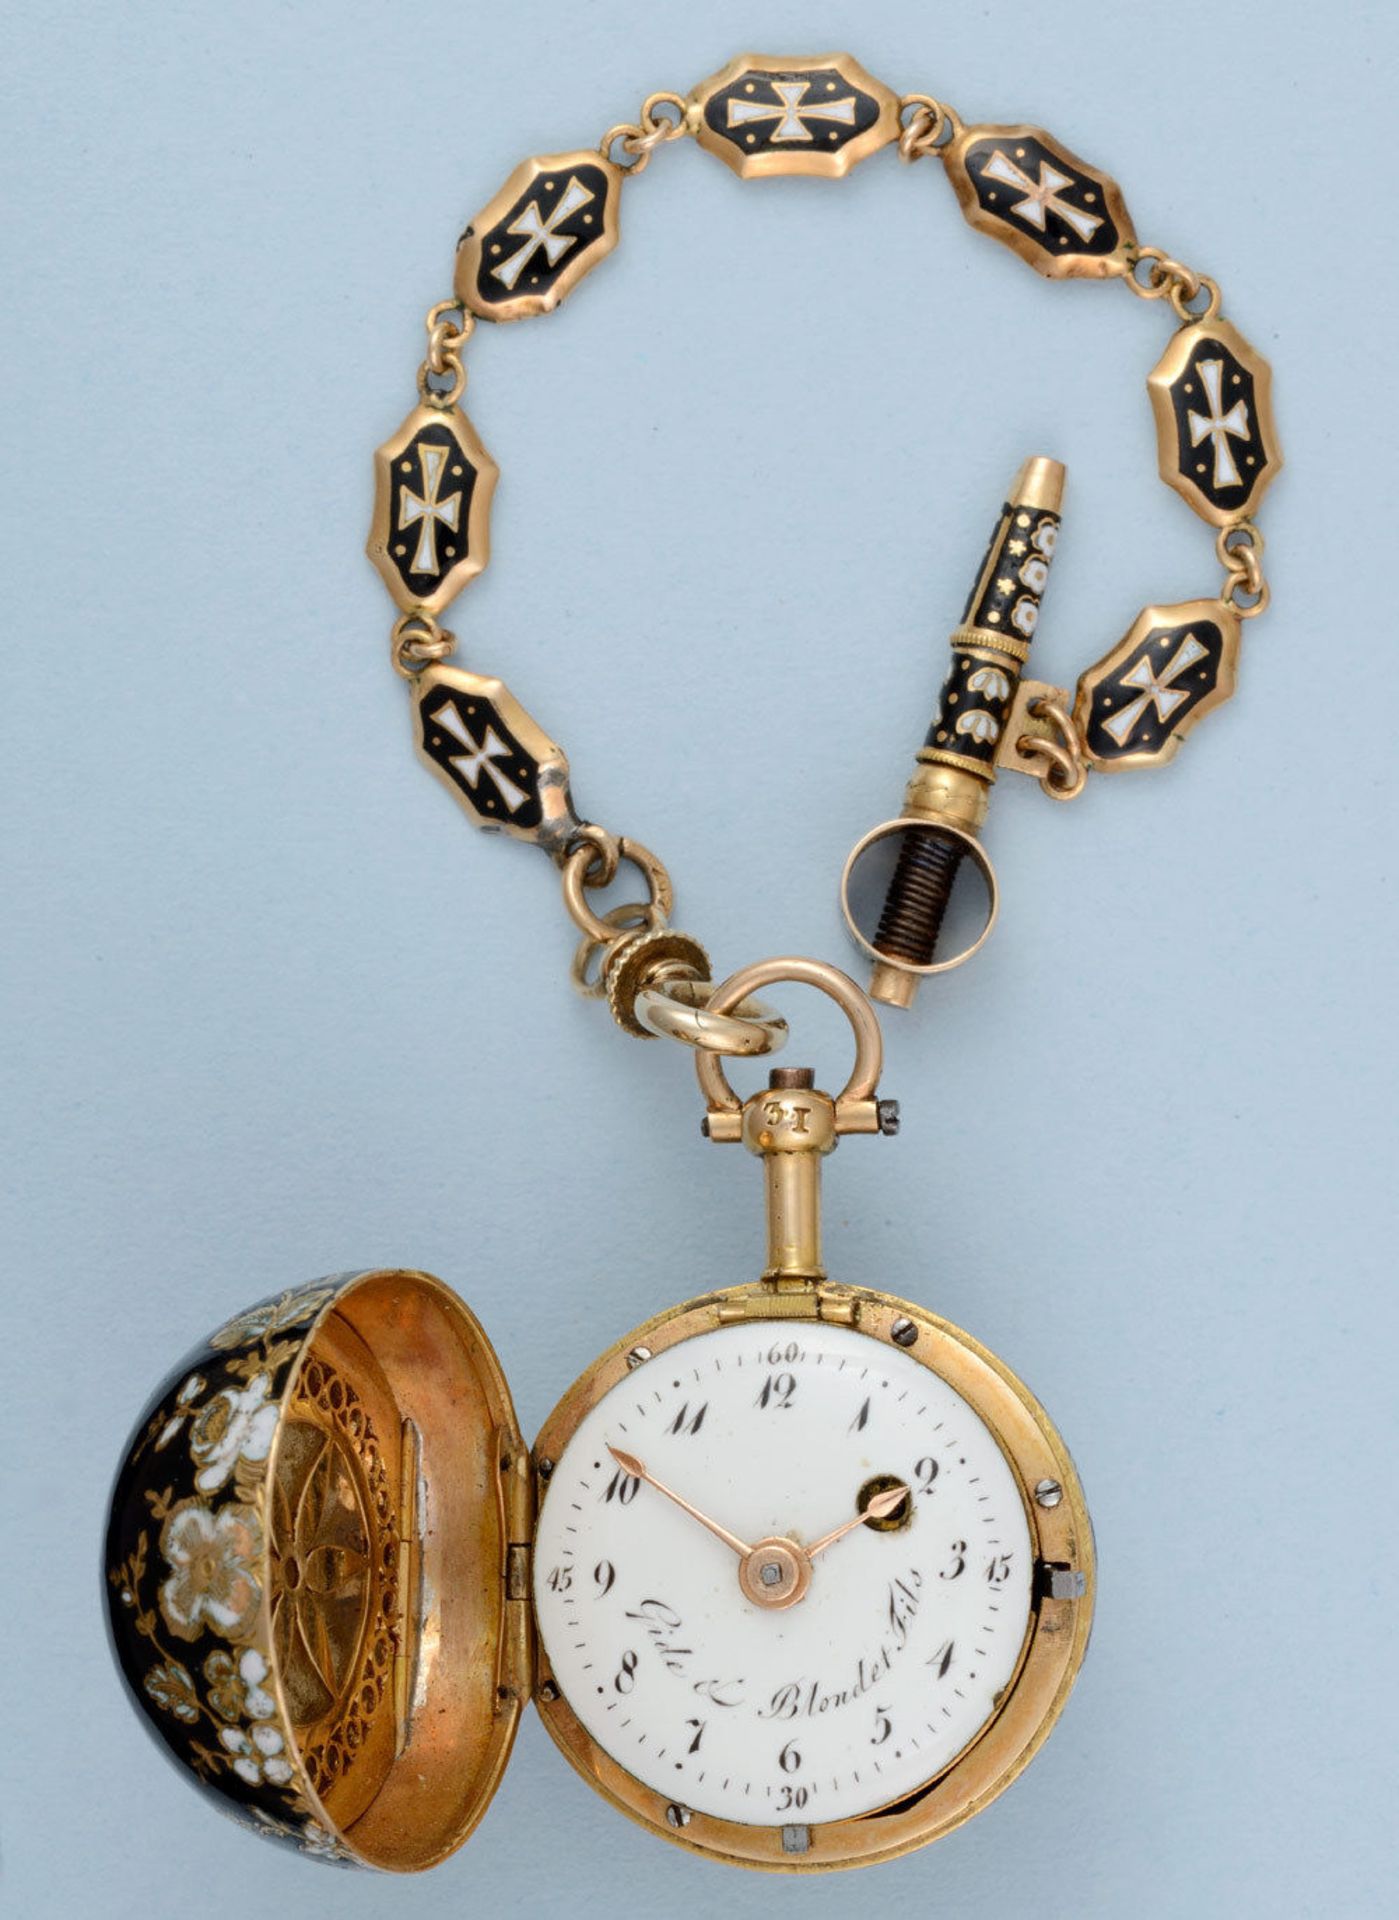 Gold and Enamel Verge Ball Watch and Chain - Image 4 of 7